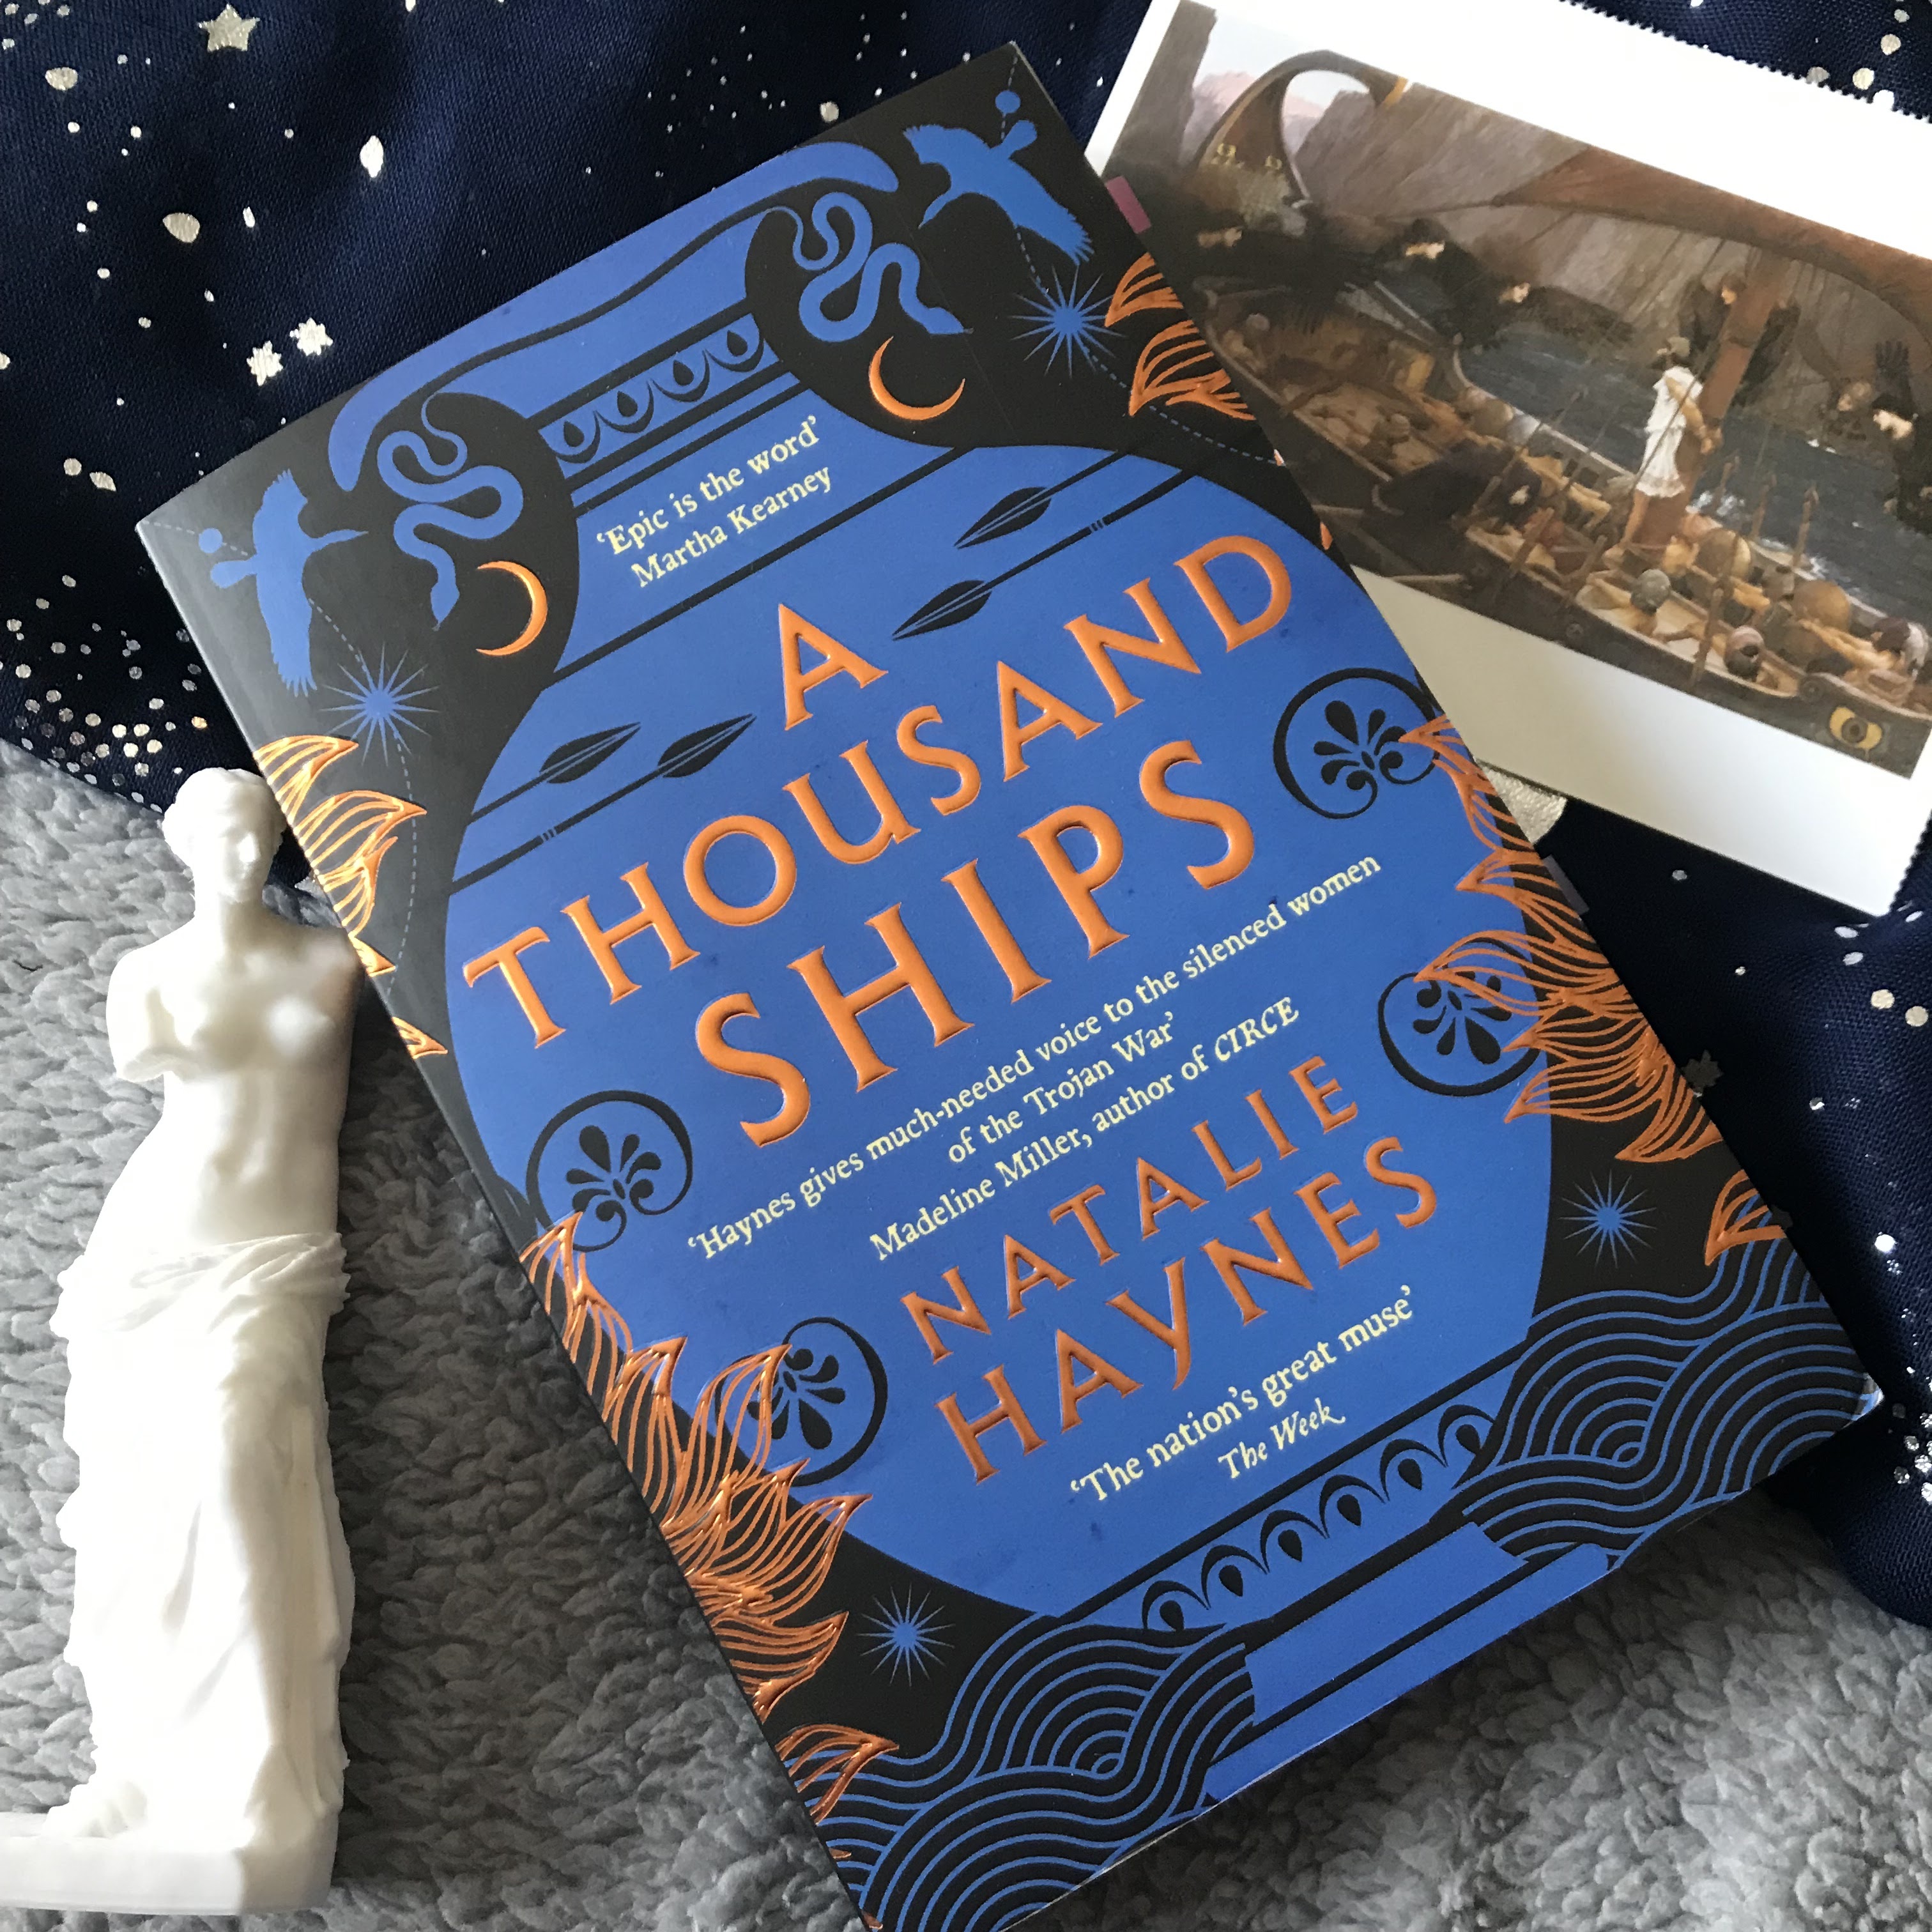 A photo of A Thousand Ships by Natalie Haynes, diagonal, with the top facing the top left corner and the bottom facing the bottom right. It's half on a dark blue scarf with metallic silver stars and suns, and half on a fluffy, light grey duvet. On it's right, and slightly underneath, is a postcard of Ulysses and the Sirens by John William Waterhouse, and on it's left is a white Venus de Milo ornament.